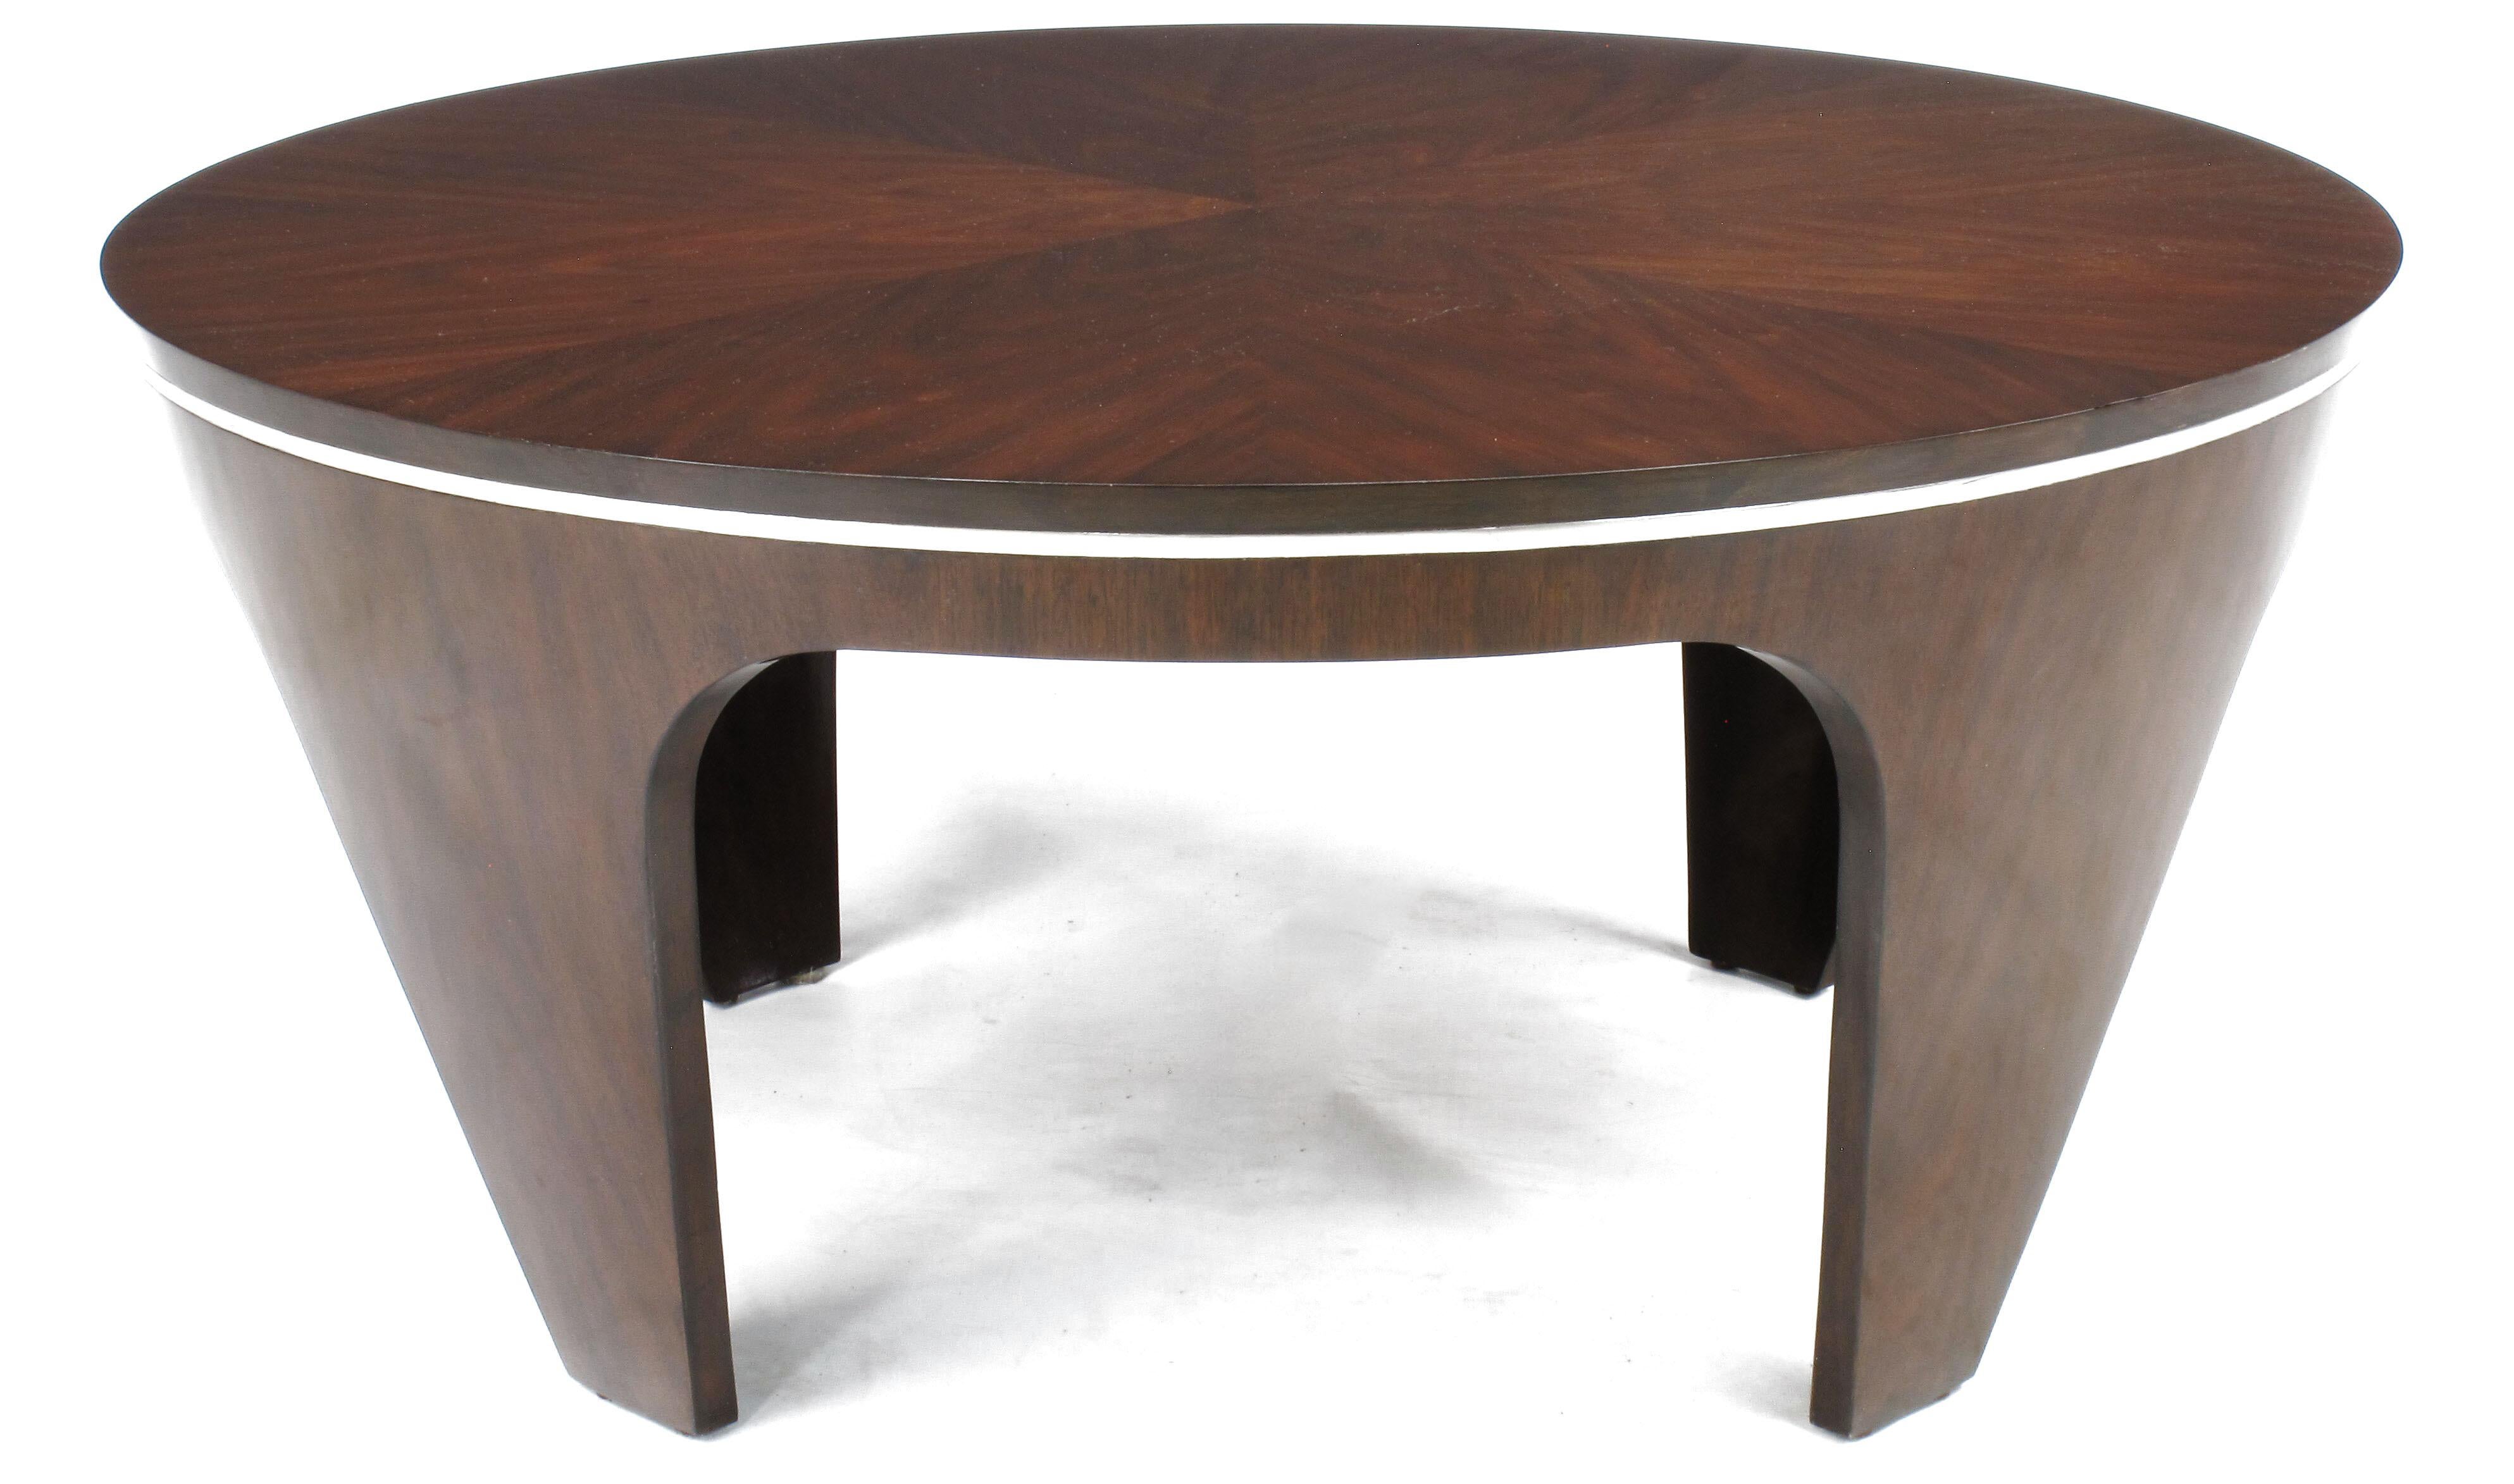 Late 20th Century Italian Art Deco Revival Round Mahogany Coffee Table with Parquetry Top